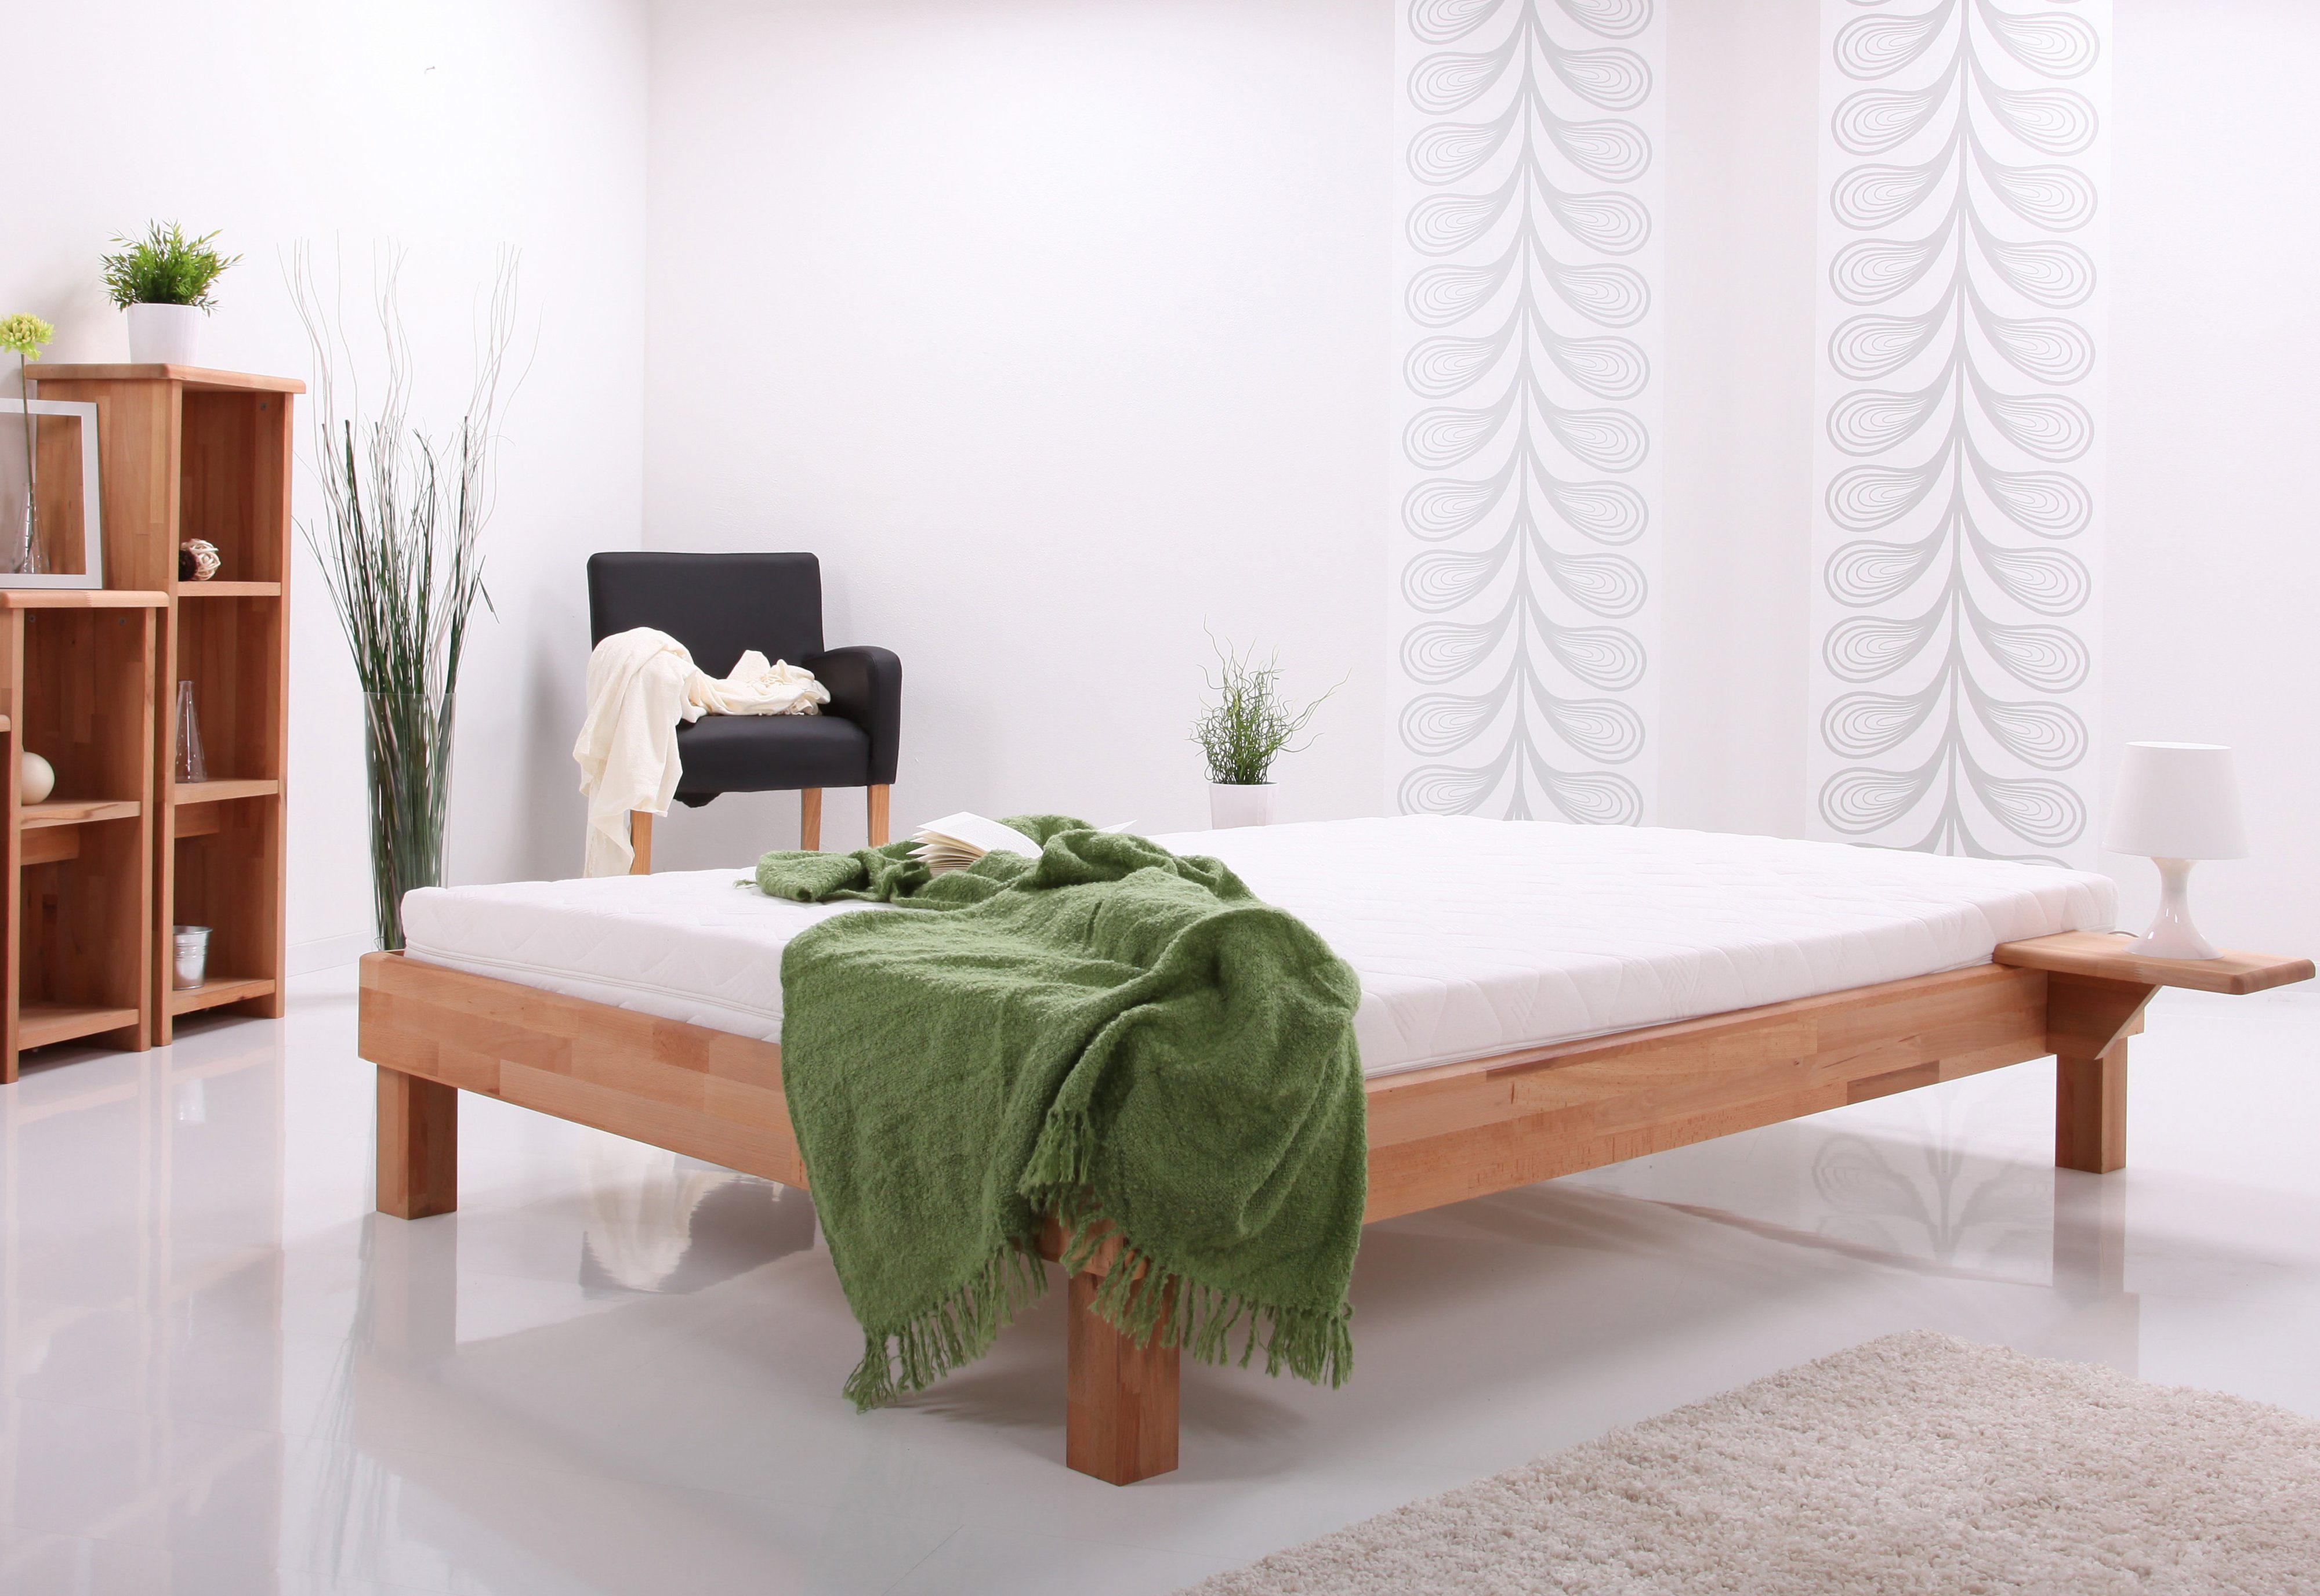 Otto - Home Affaire Bed, Made in Germany